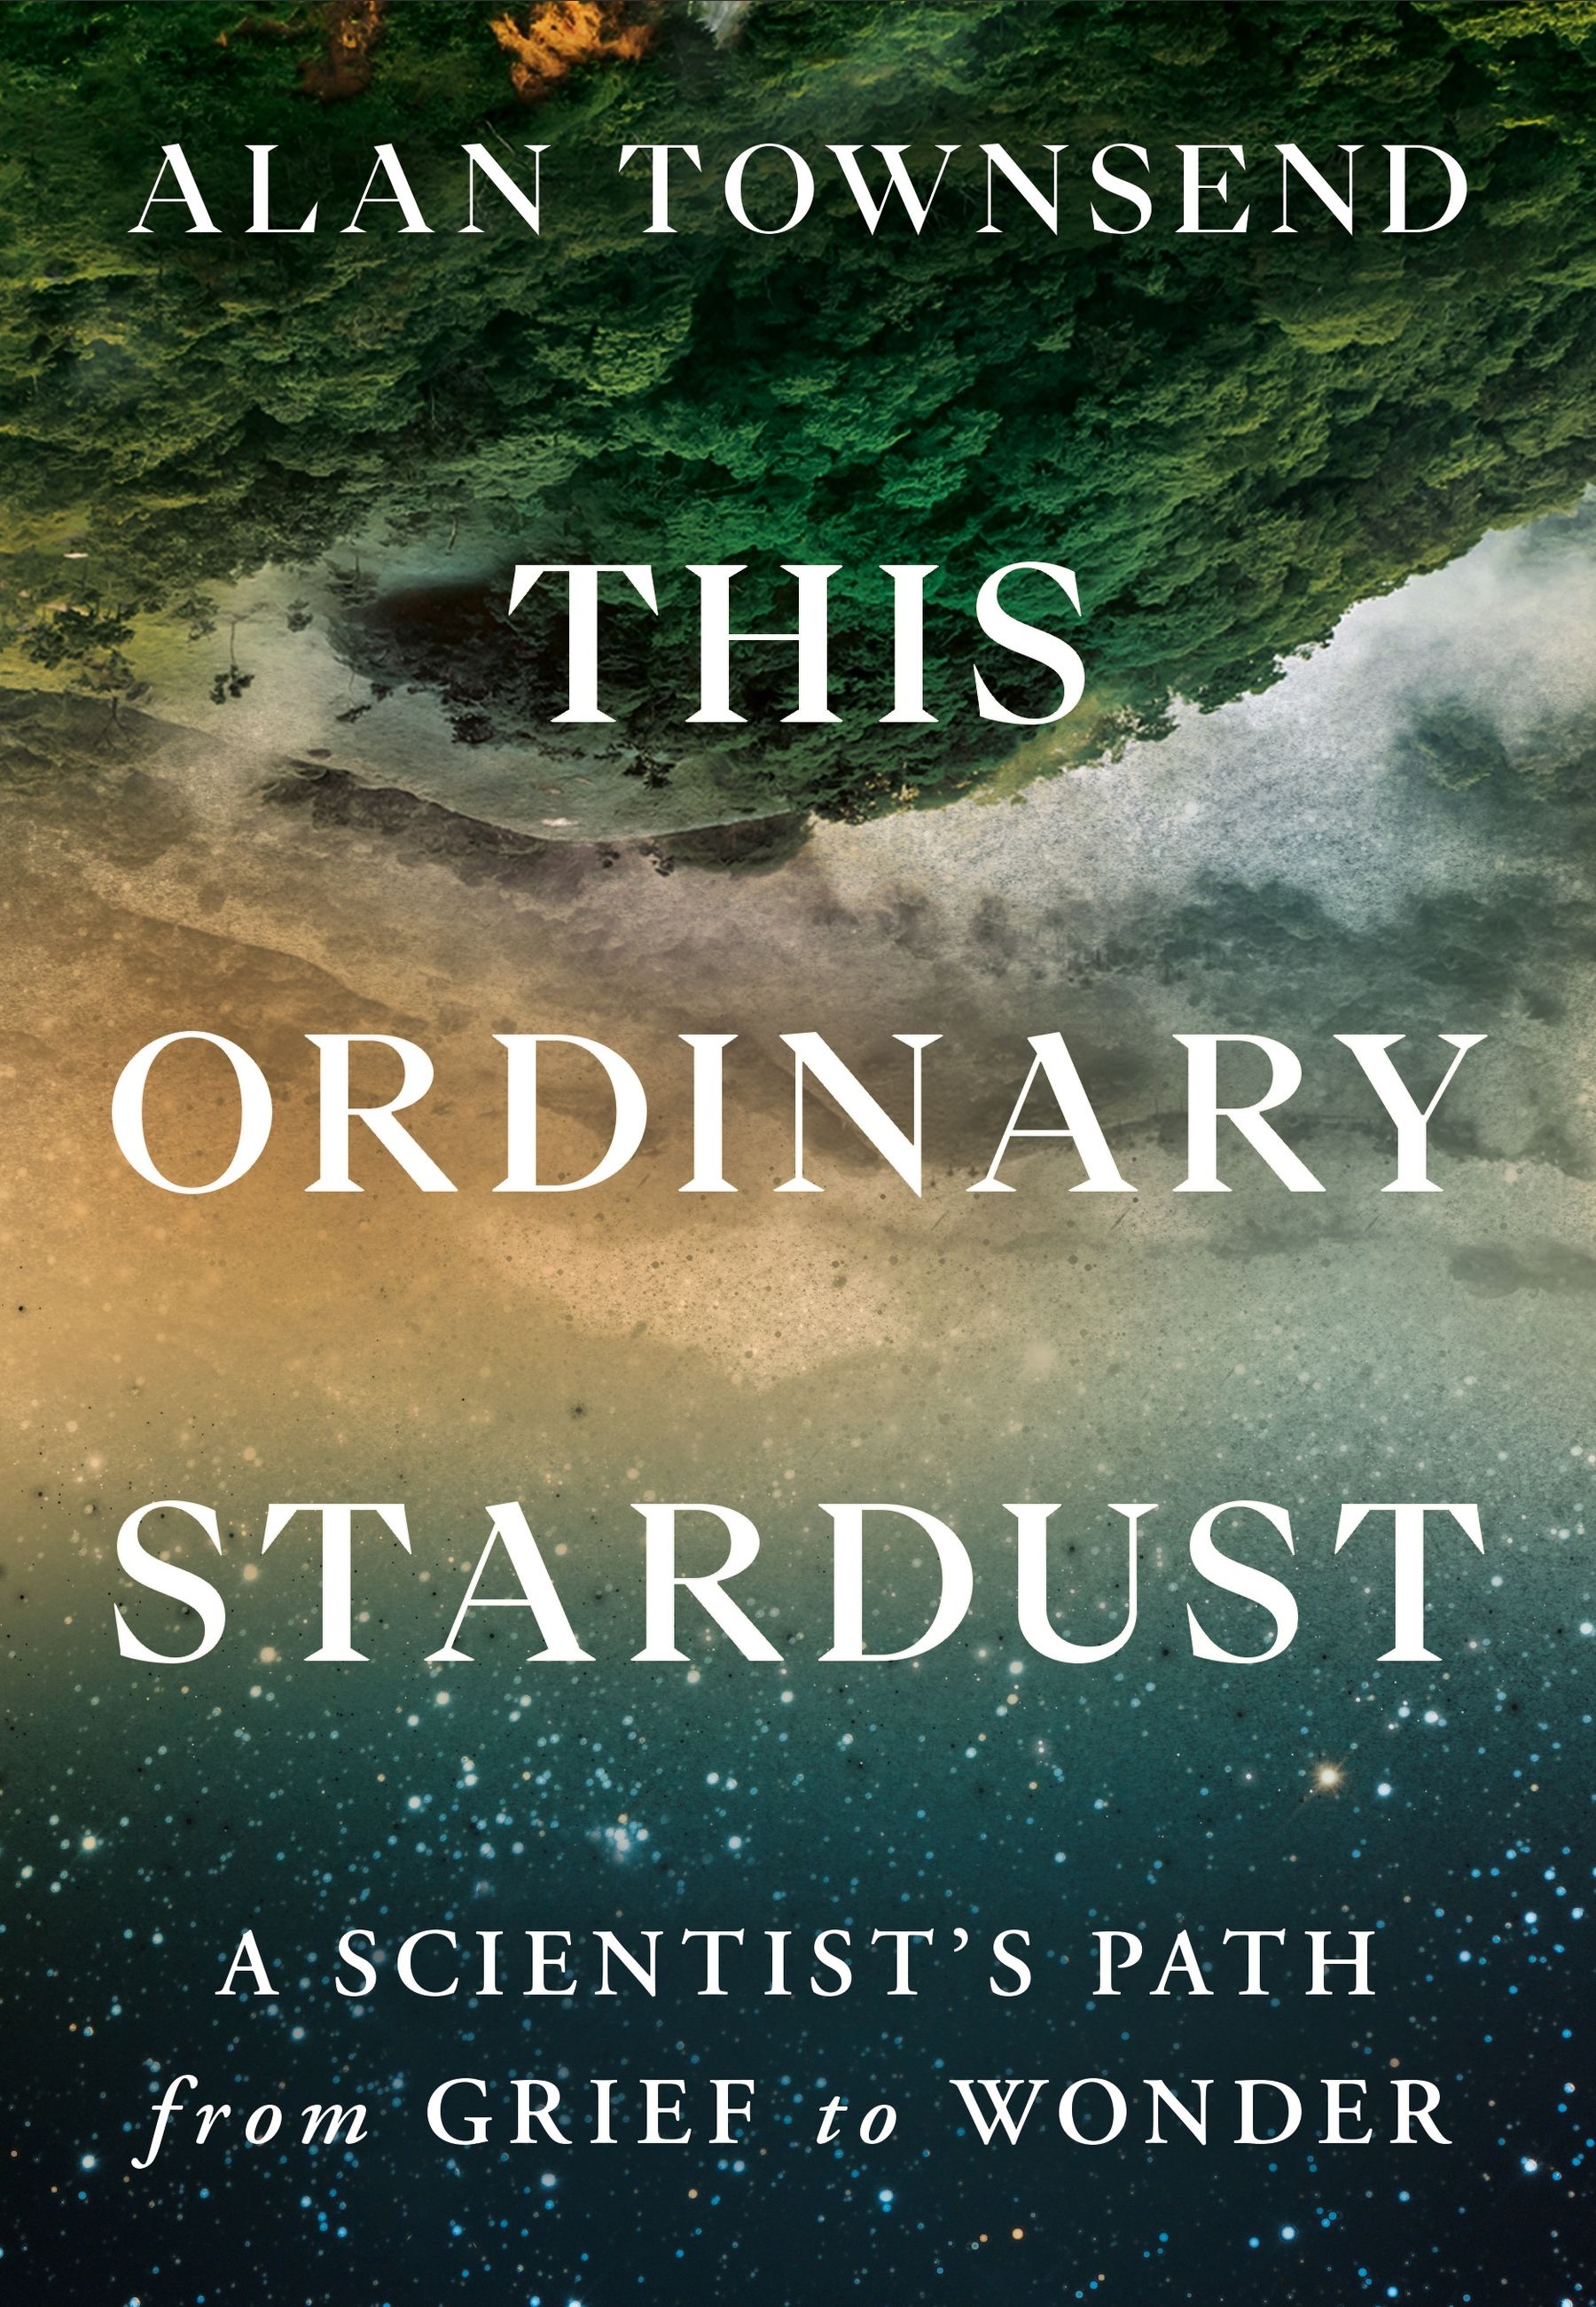 Dr. Alan Townsend -- "This Ordinary Stardust"